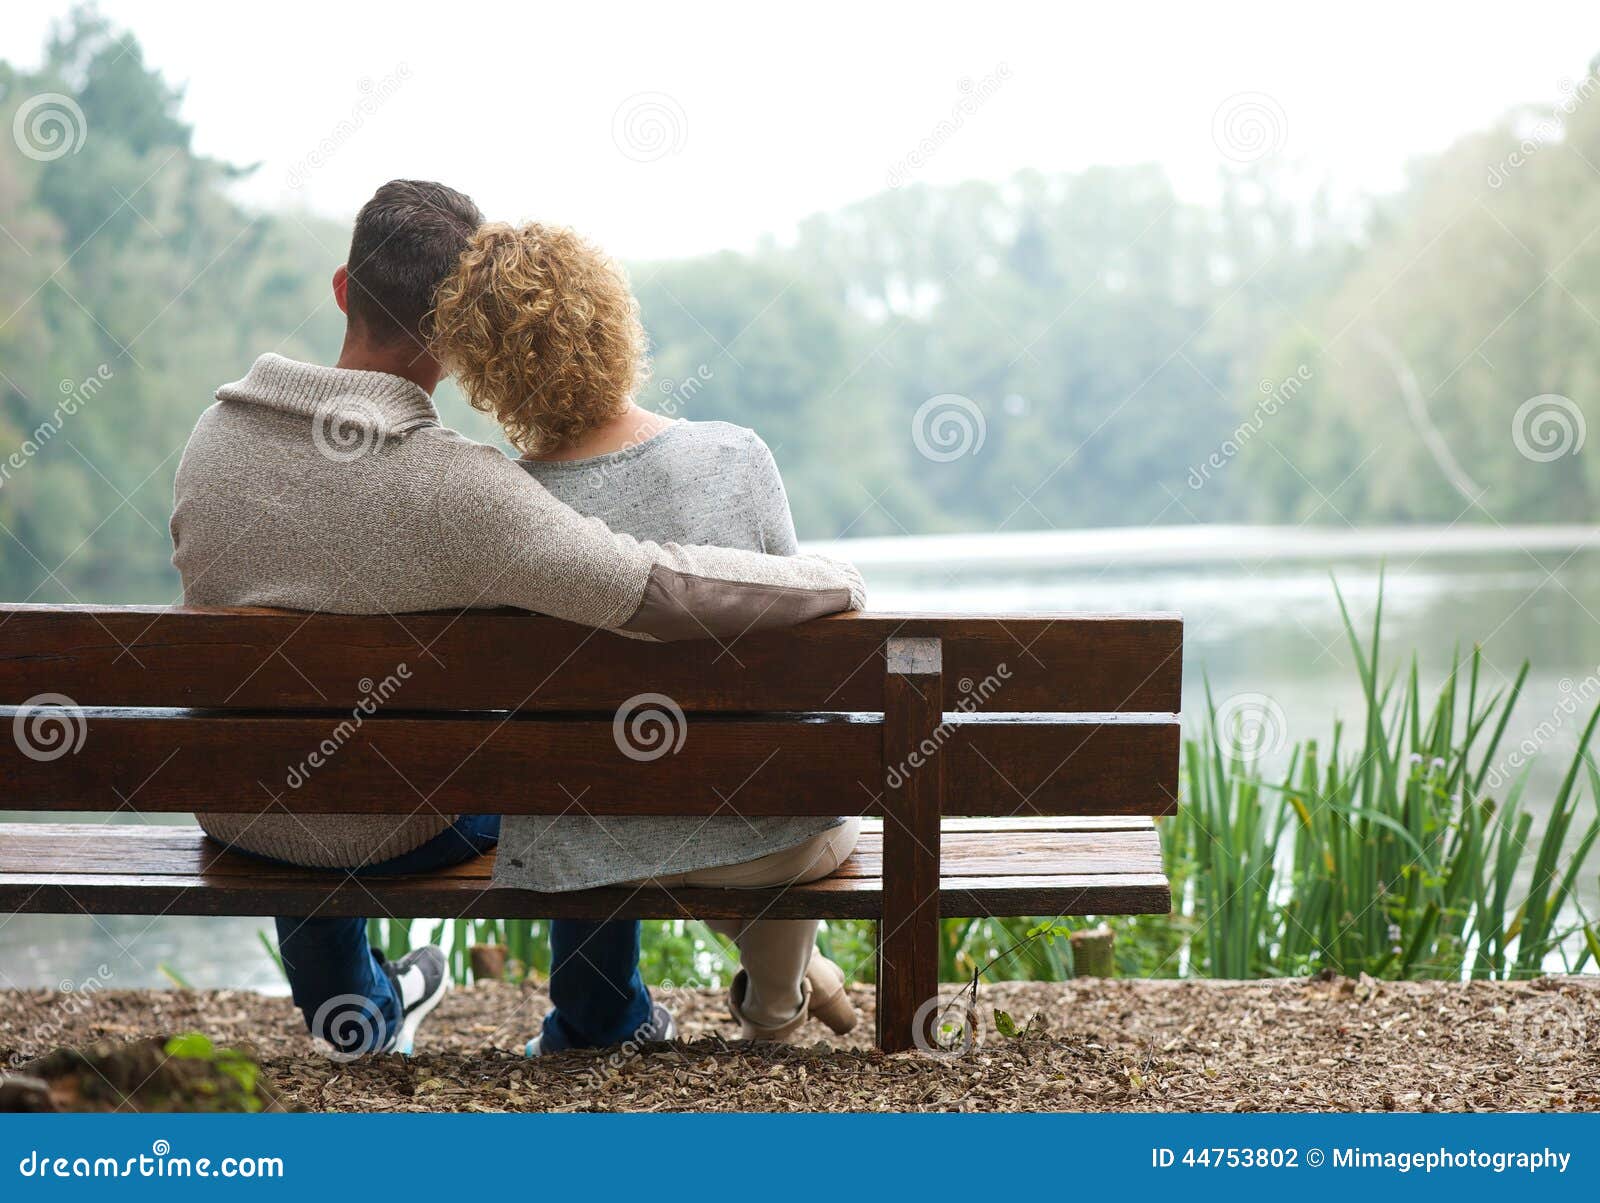 Free Images : People in nature, photograph, sitting, people, green ...